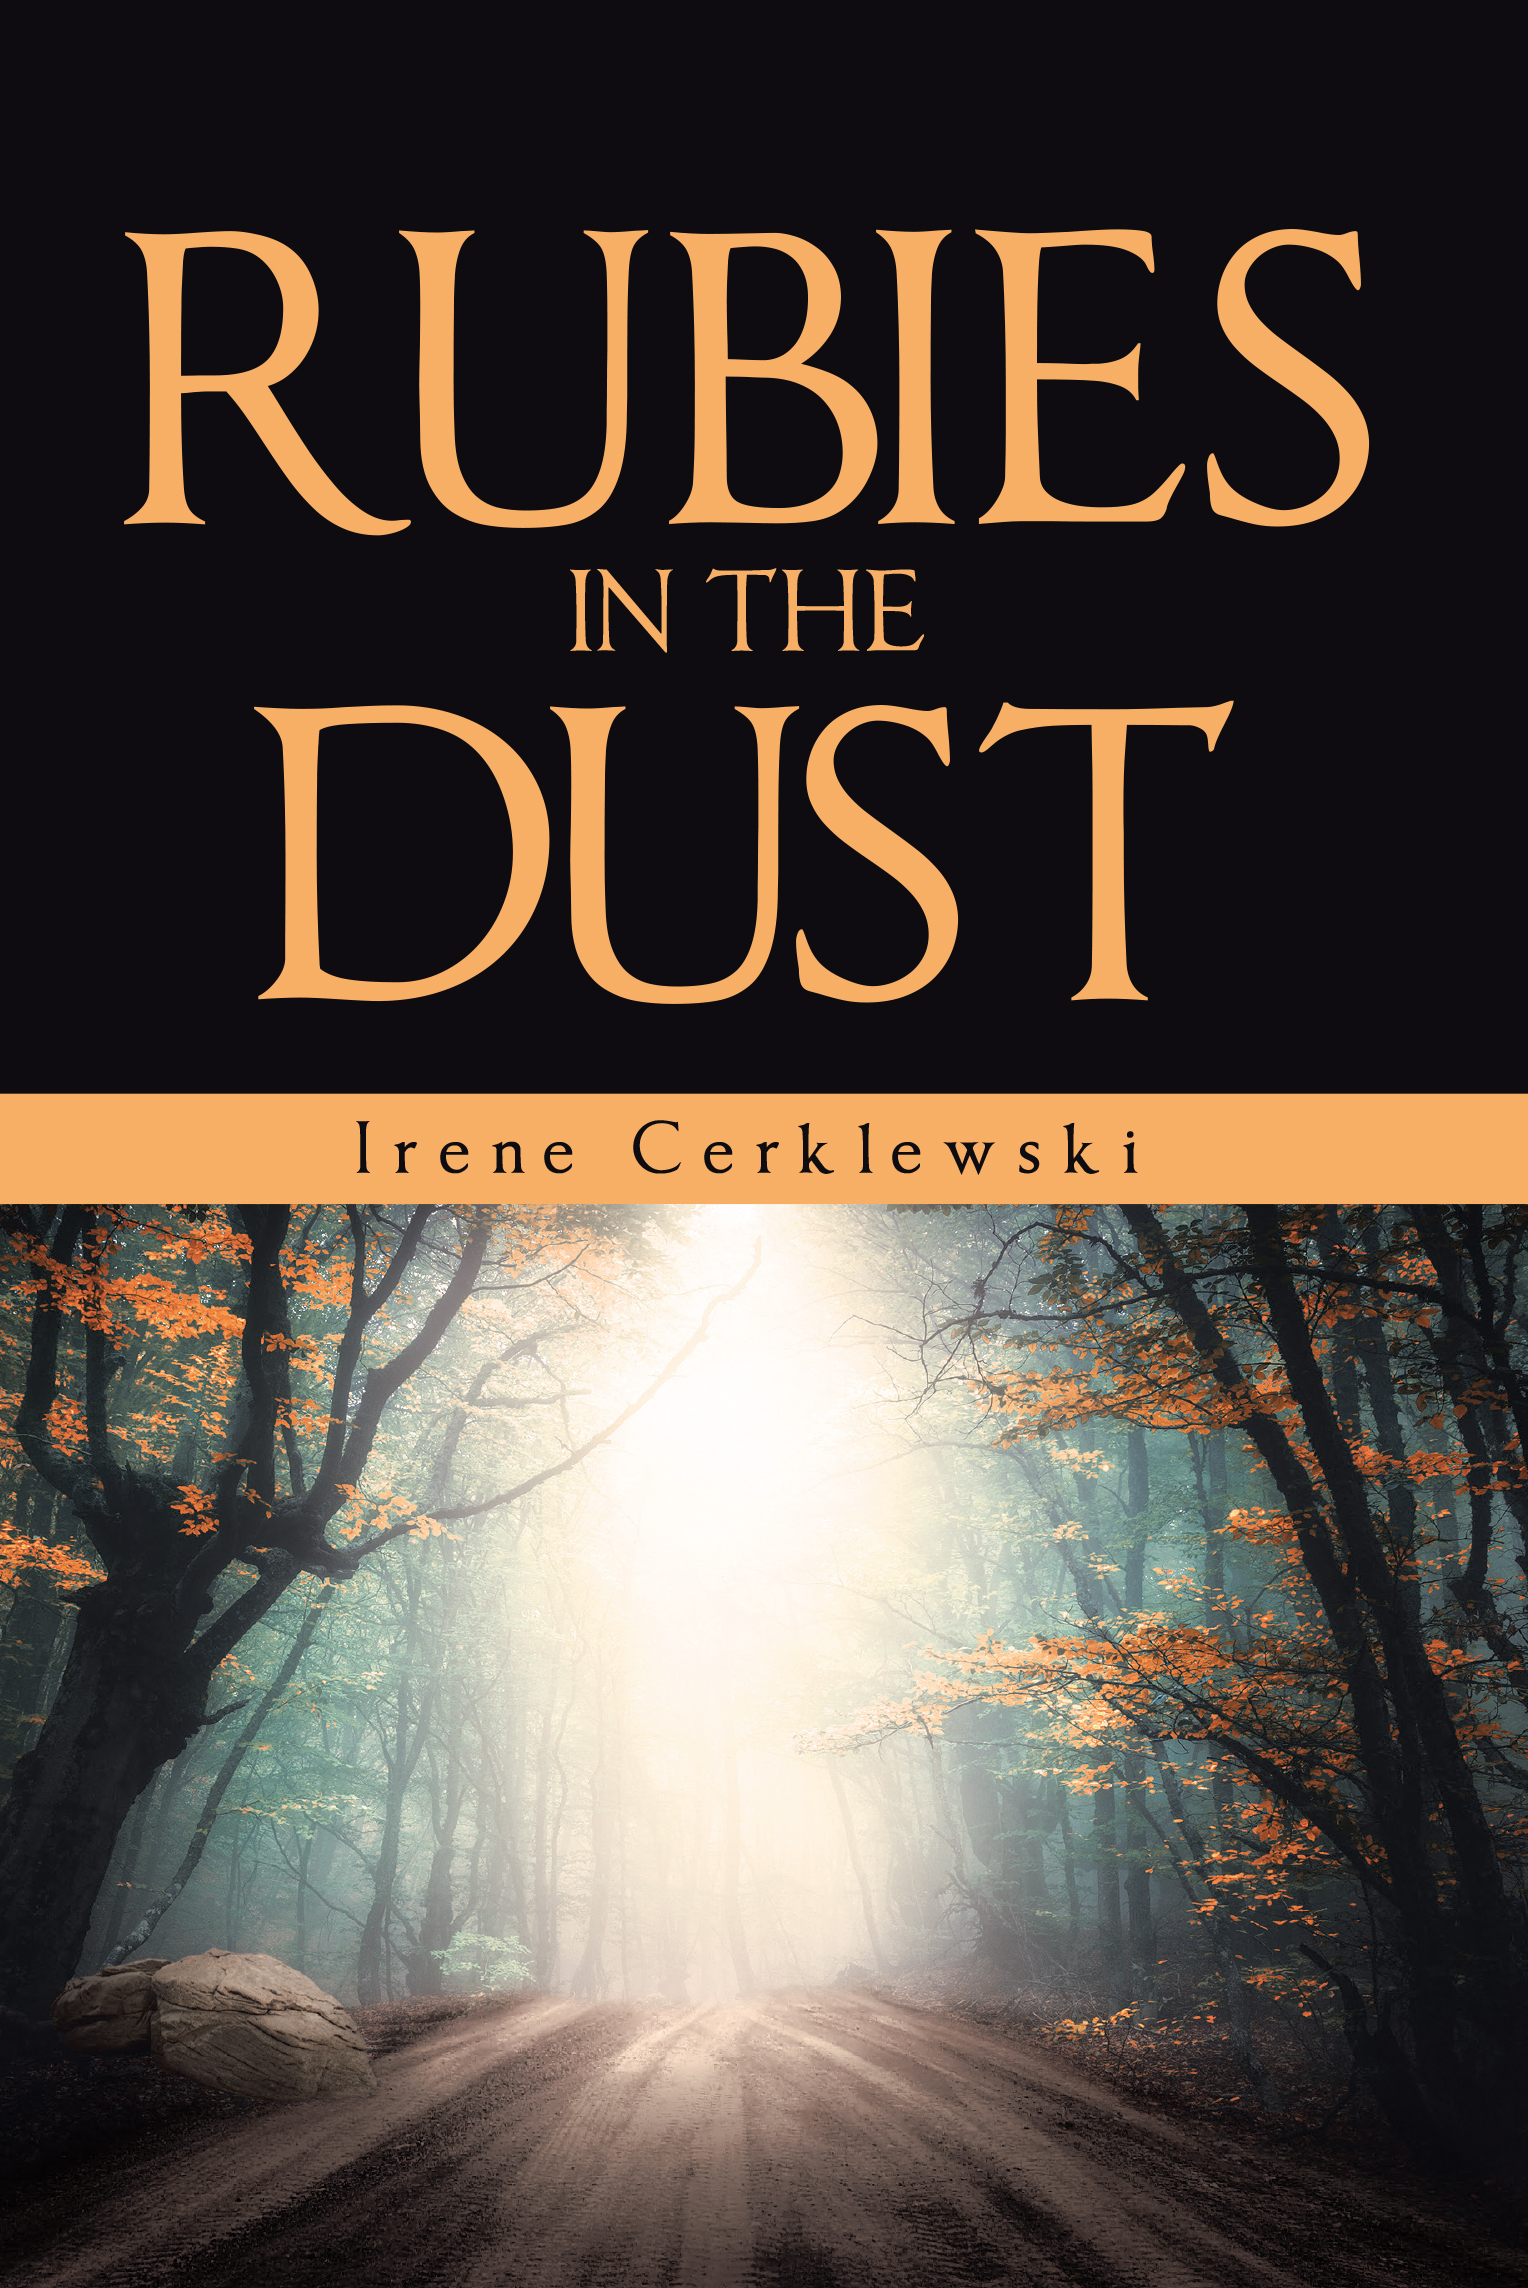 Author Irene Cerklewski’s New Book, "Rubies in the Dust," is a Powerful True Story That Weaves a Rich Tapestry of Resilience, Courage, and the Triumph of the Human Spirit